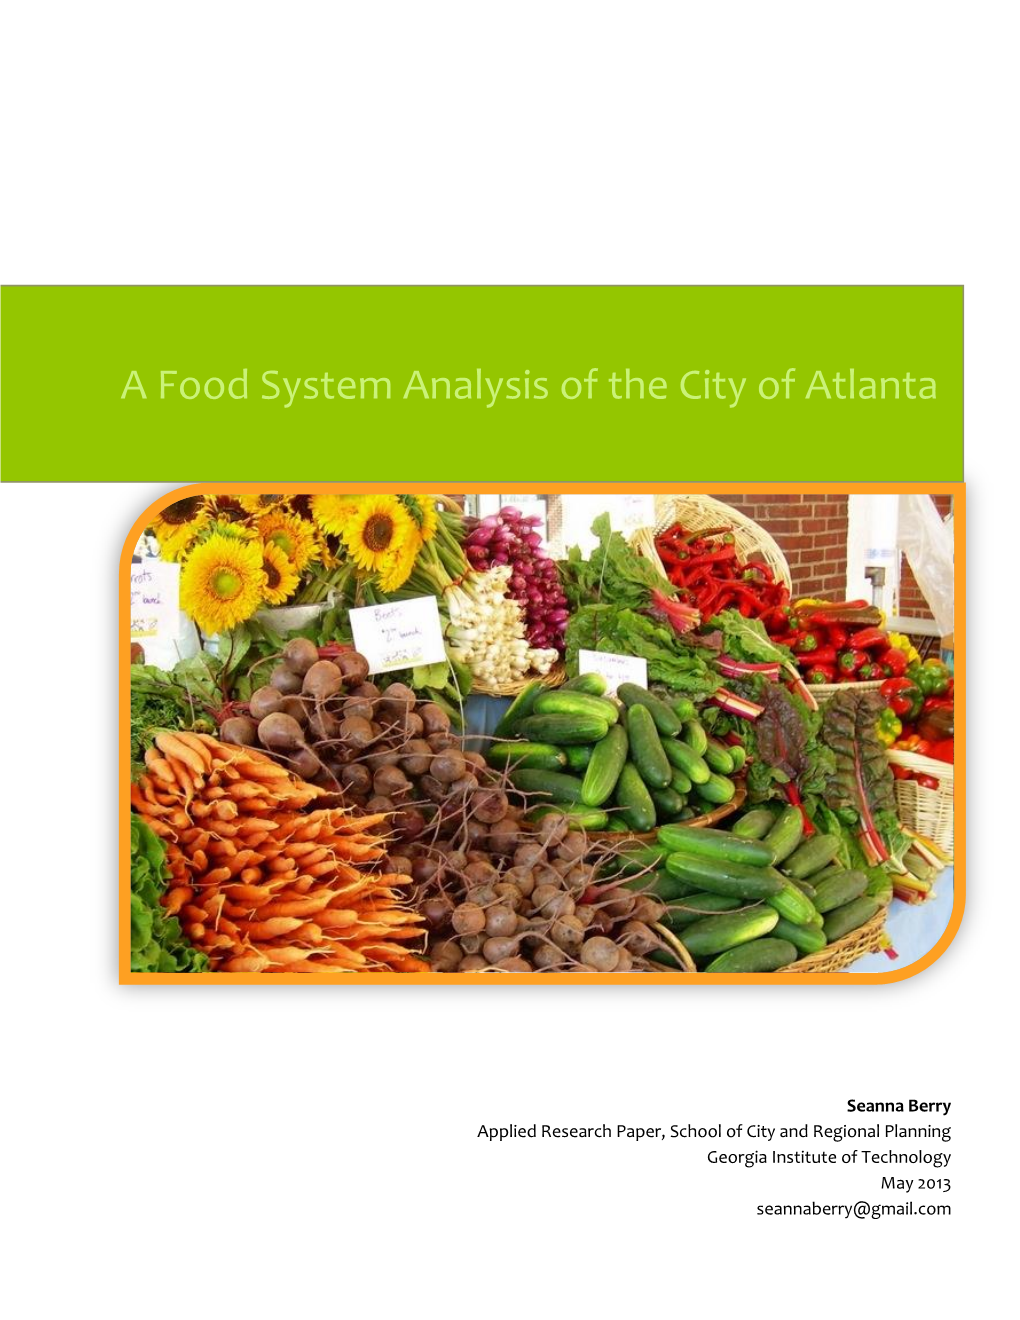 A Food System Analysis of the City of Atlanta